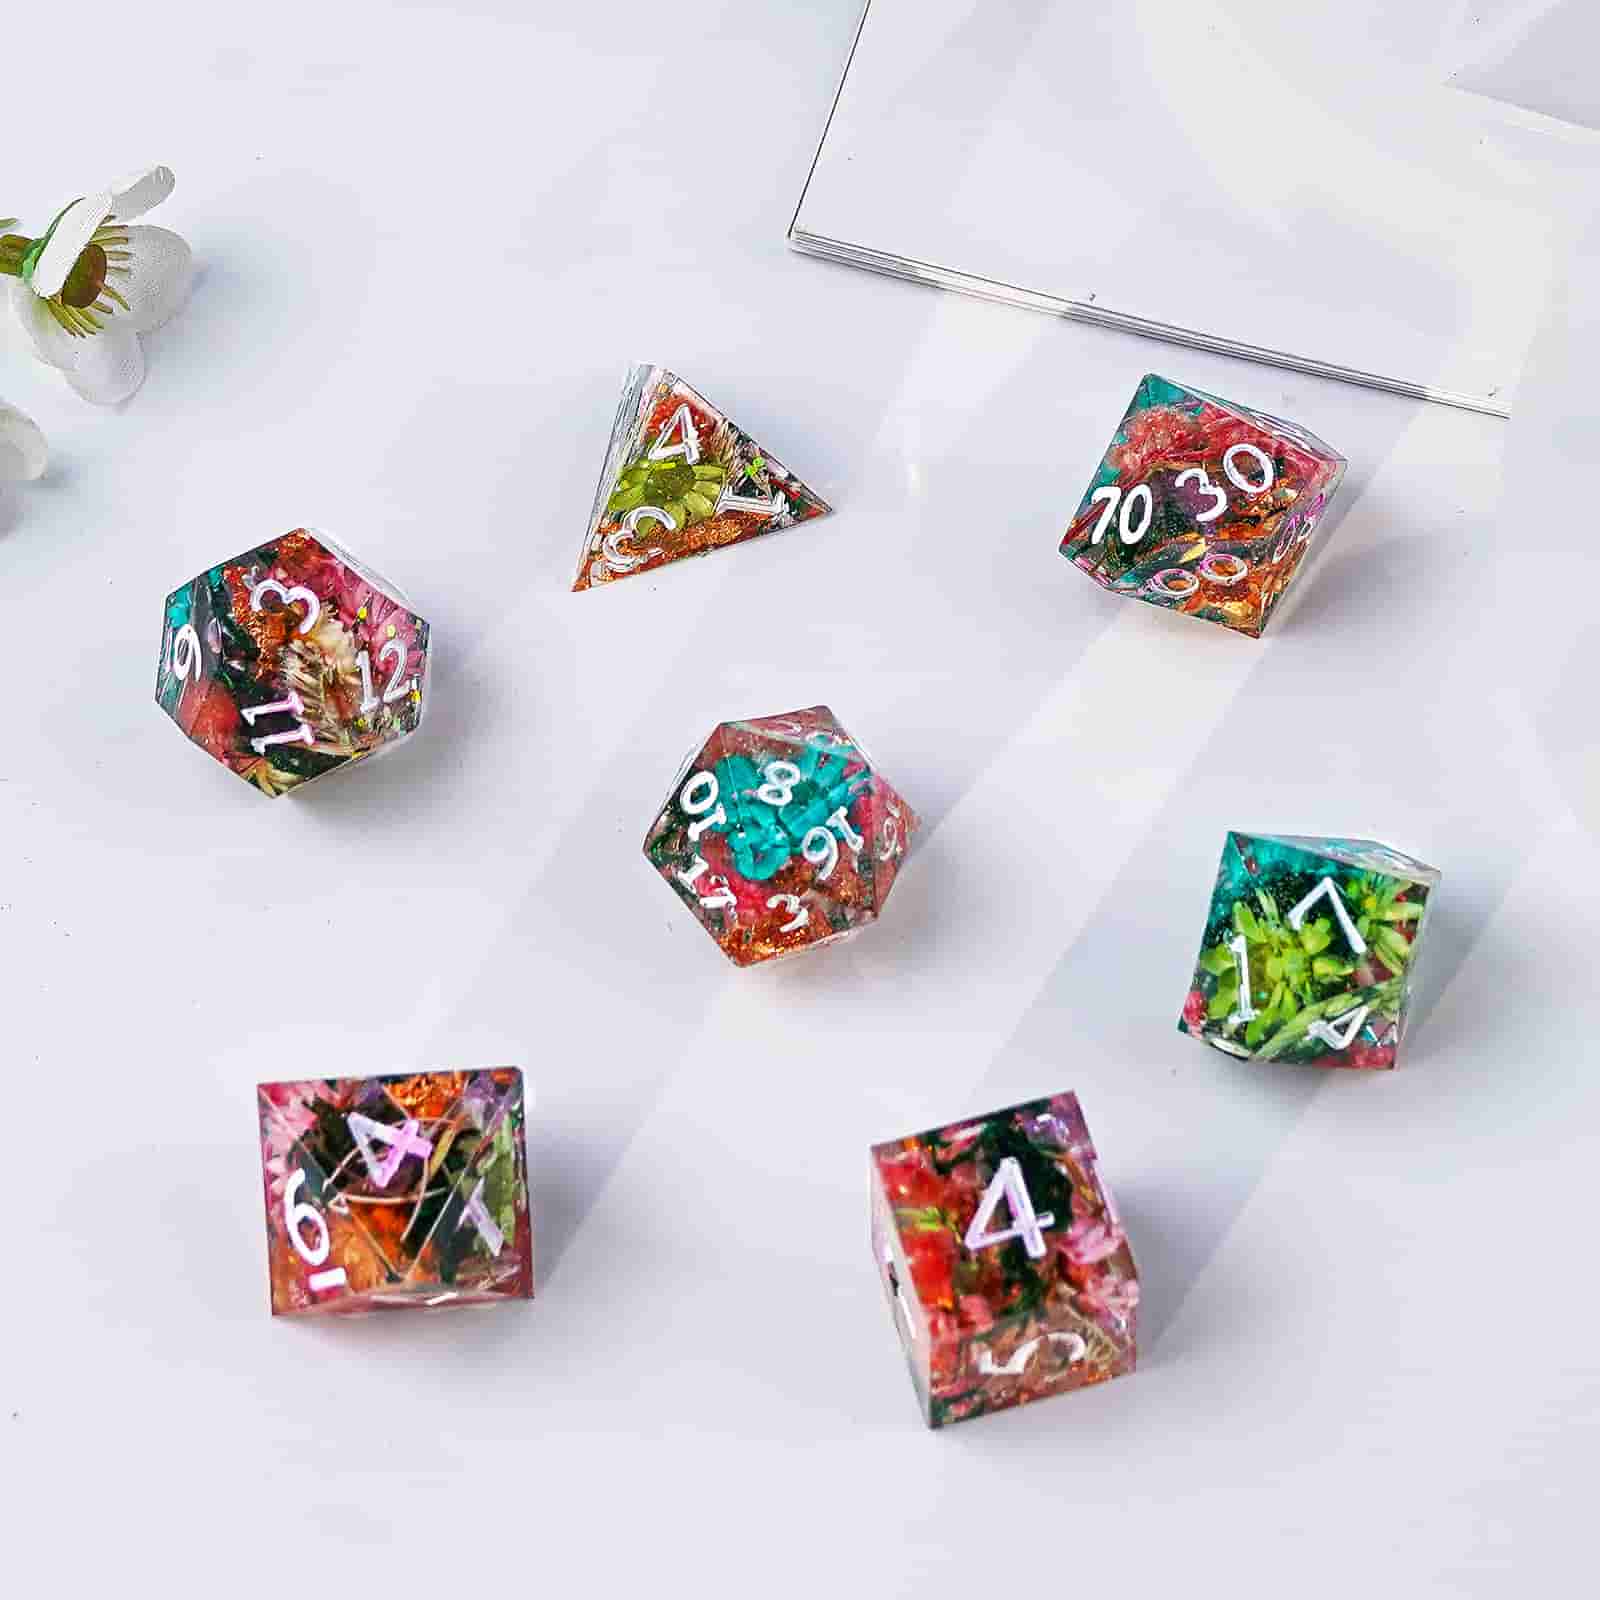 7PC Polyhedral Dice Mold – Cassiopeia Dice